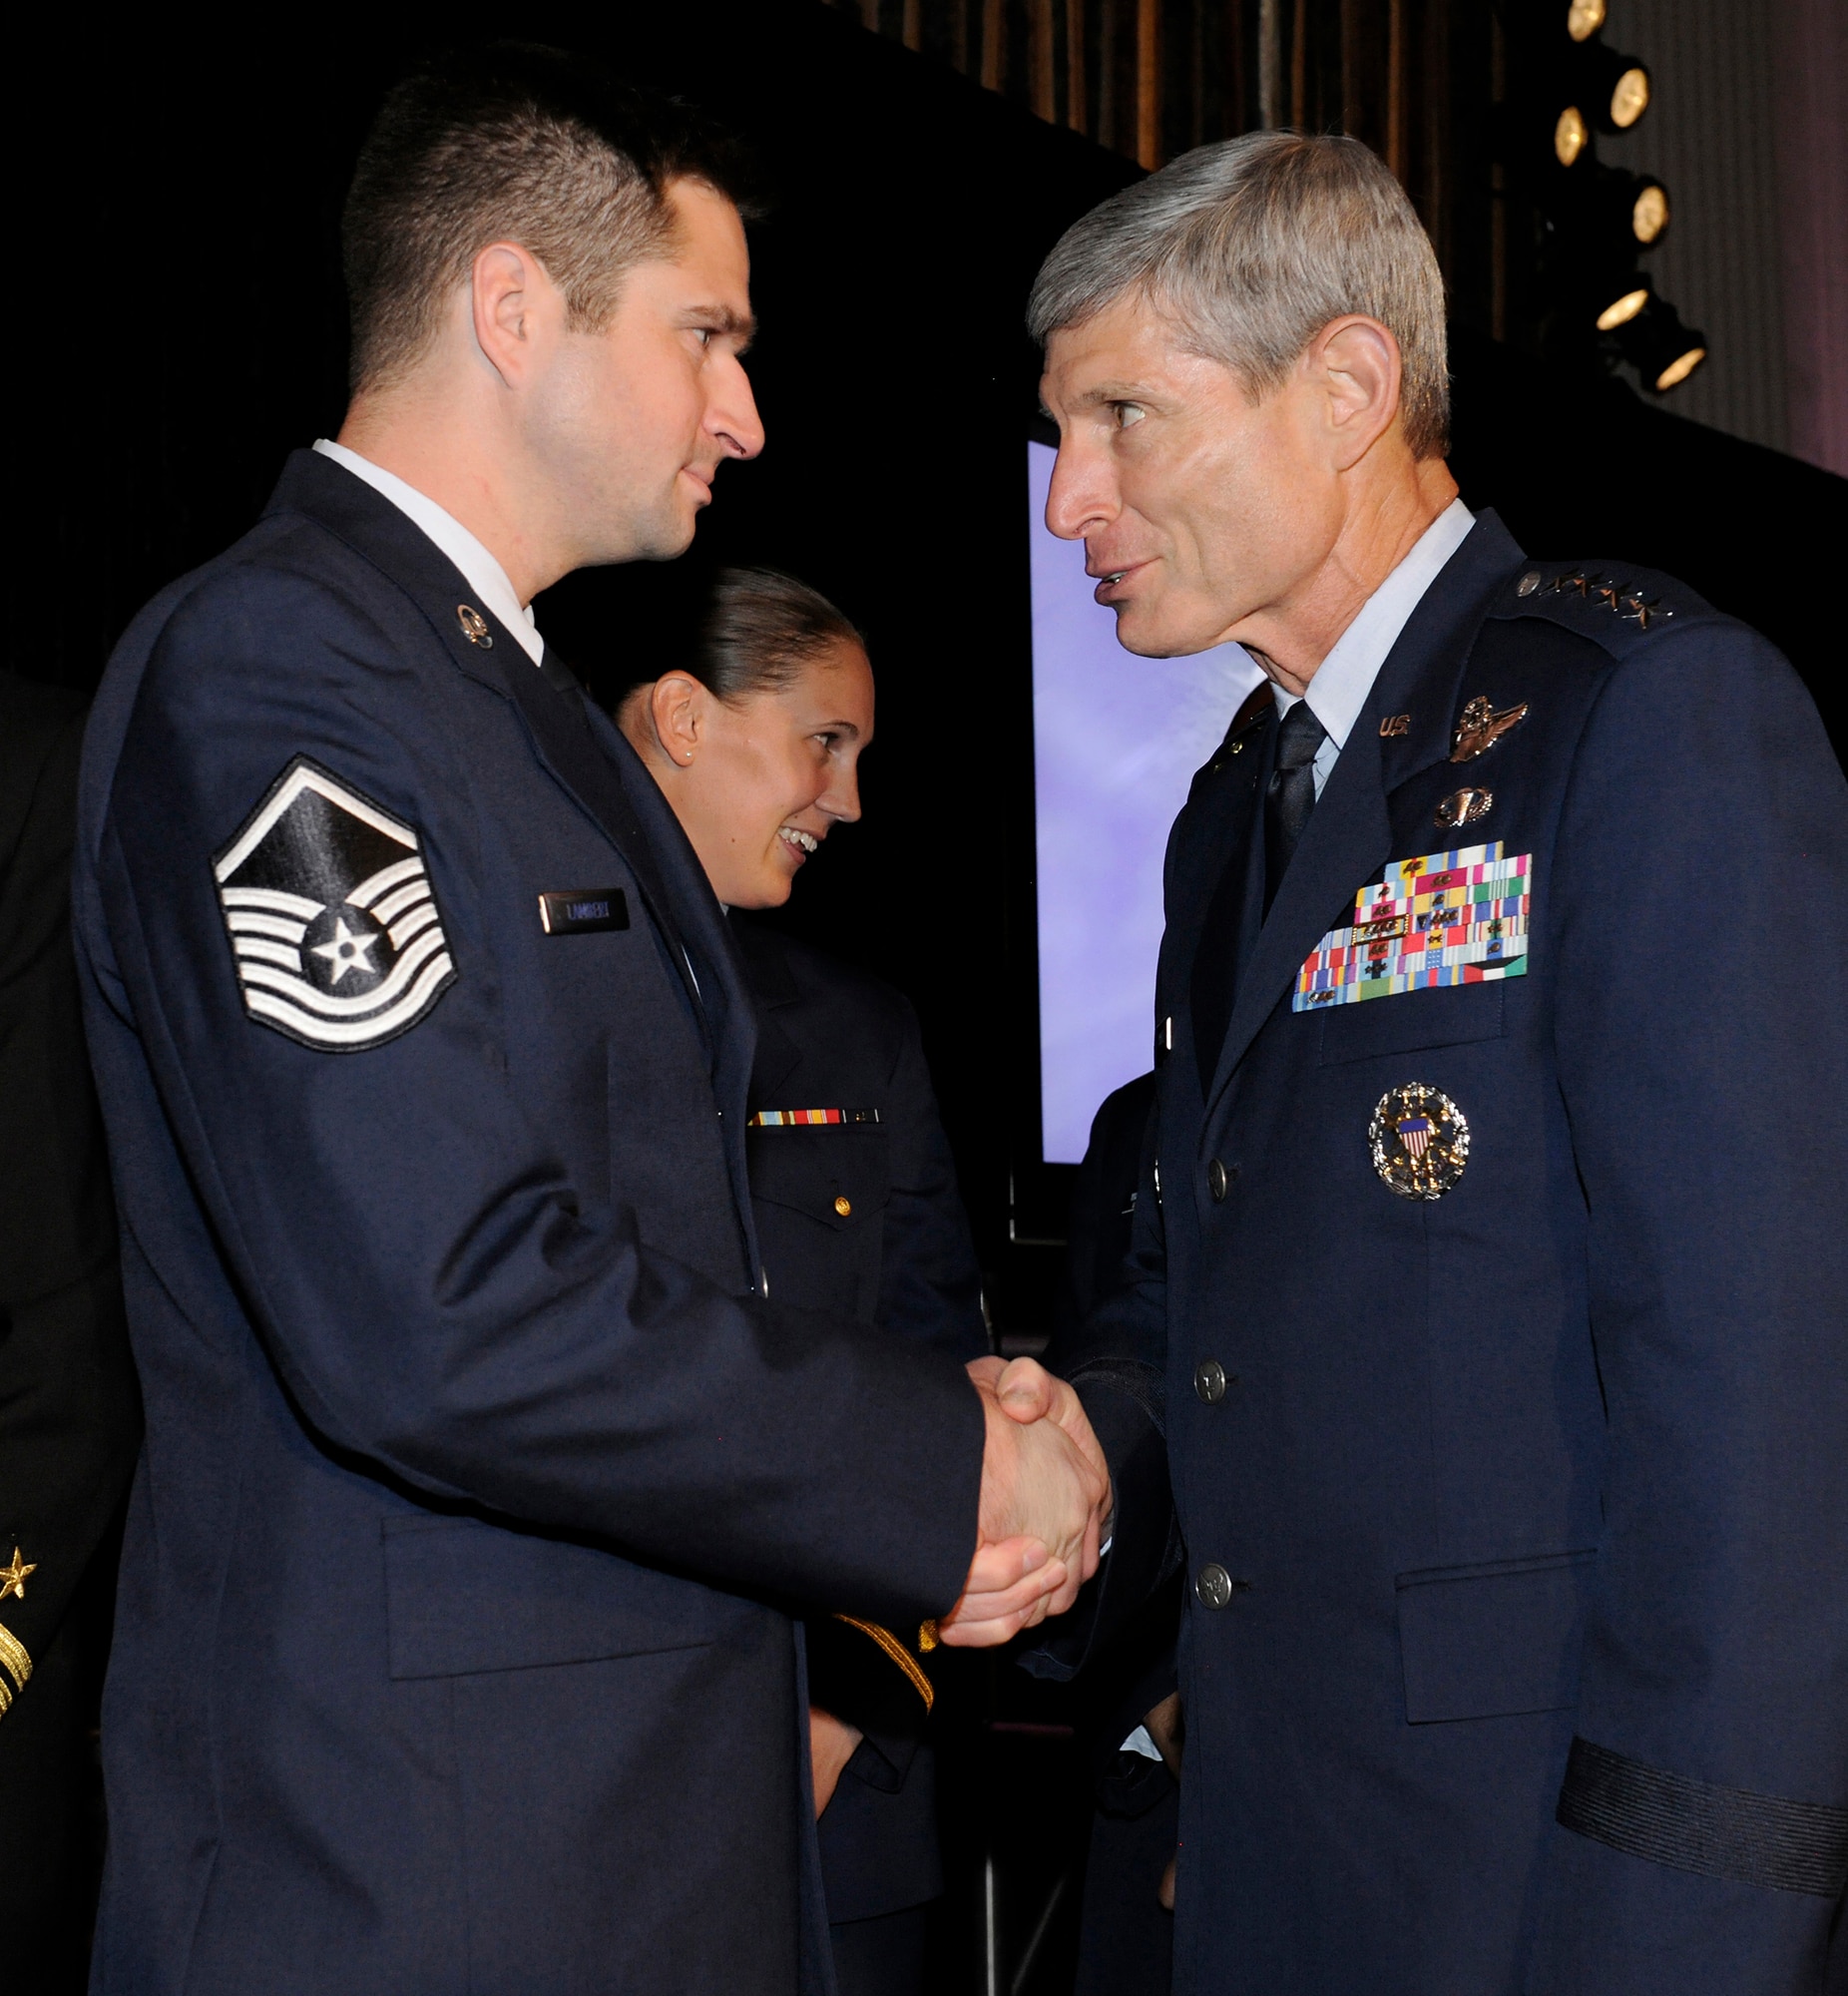 Air Force Chief of Staff Gen. Norton Schwartz congratulates Master Sgt. Brandon Lambert of the 728th Air Control Squadron, Eglin Air Force Base, Fla., on his selection as the 2012 Air Force Times Airman of the Year during the 2012 Military Times’ Service Members of the Year Awards awards ceremony July 19, 2012, in Washington, D.C.  (U.S. Air Force photo/Scott M. Ash)